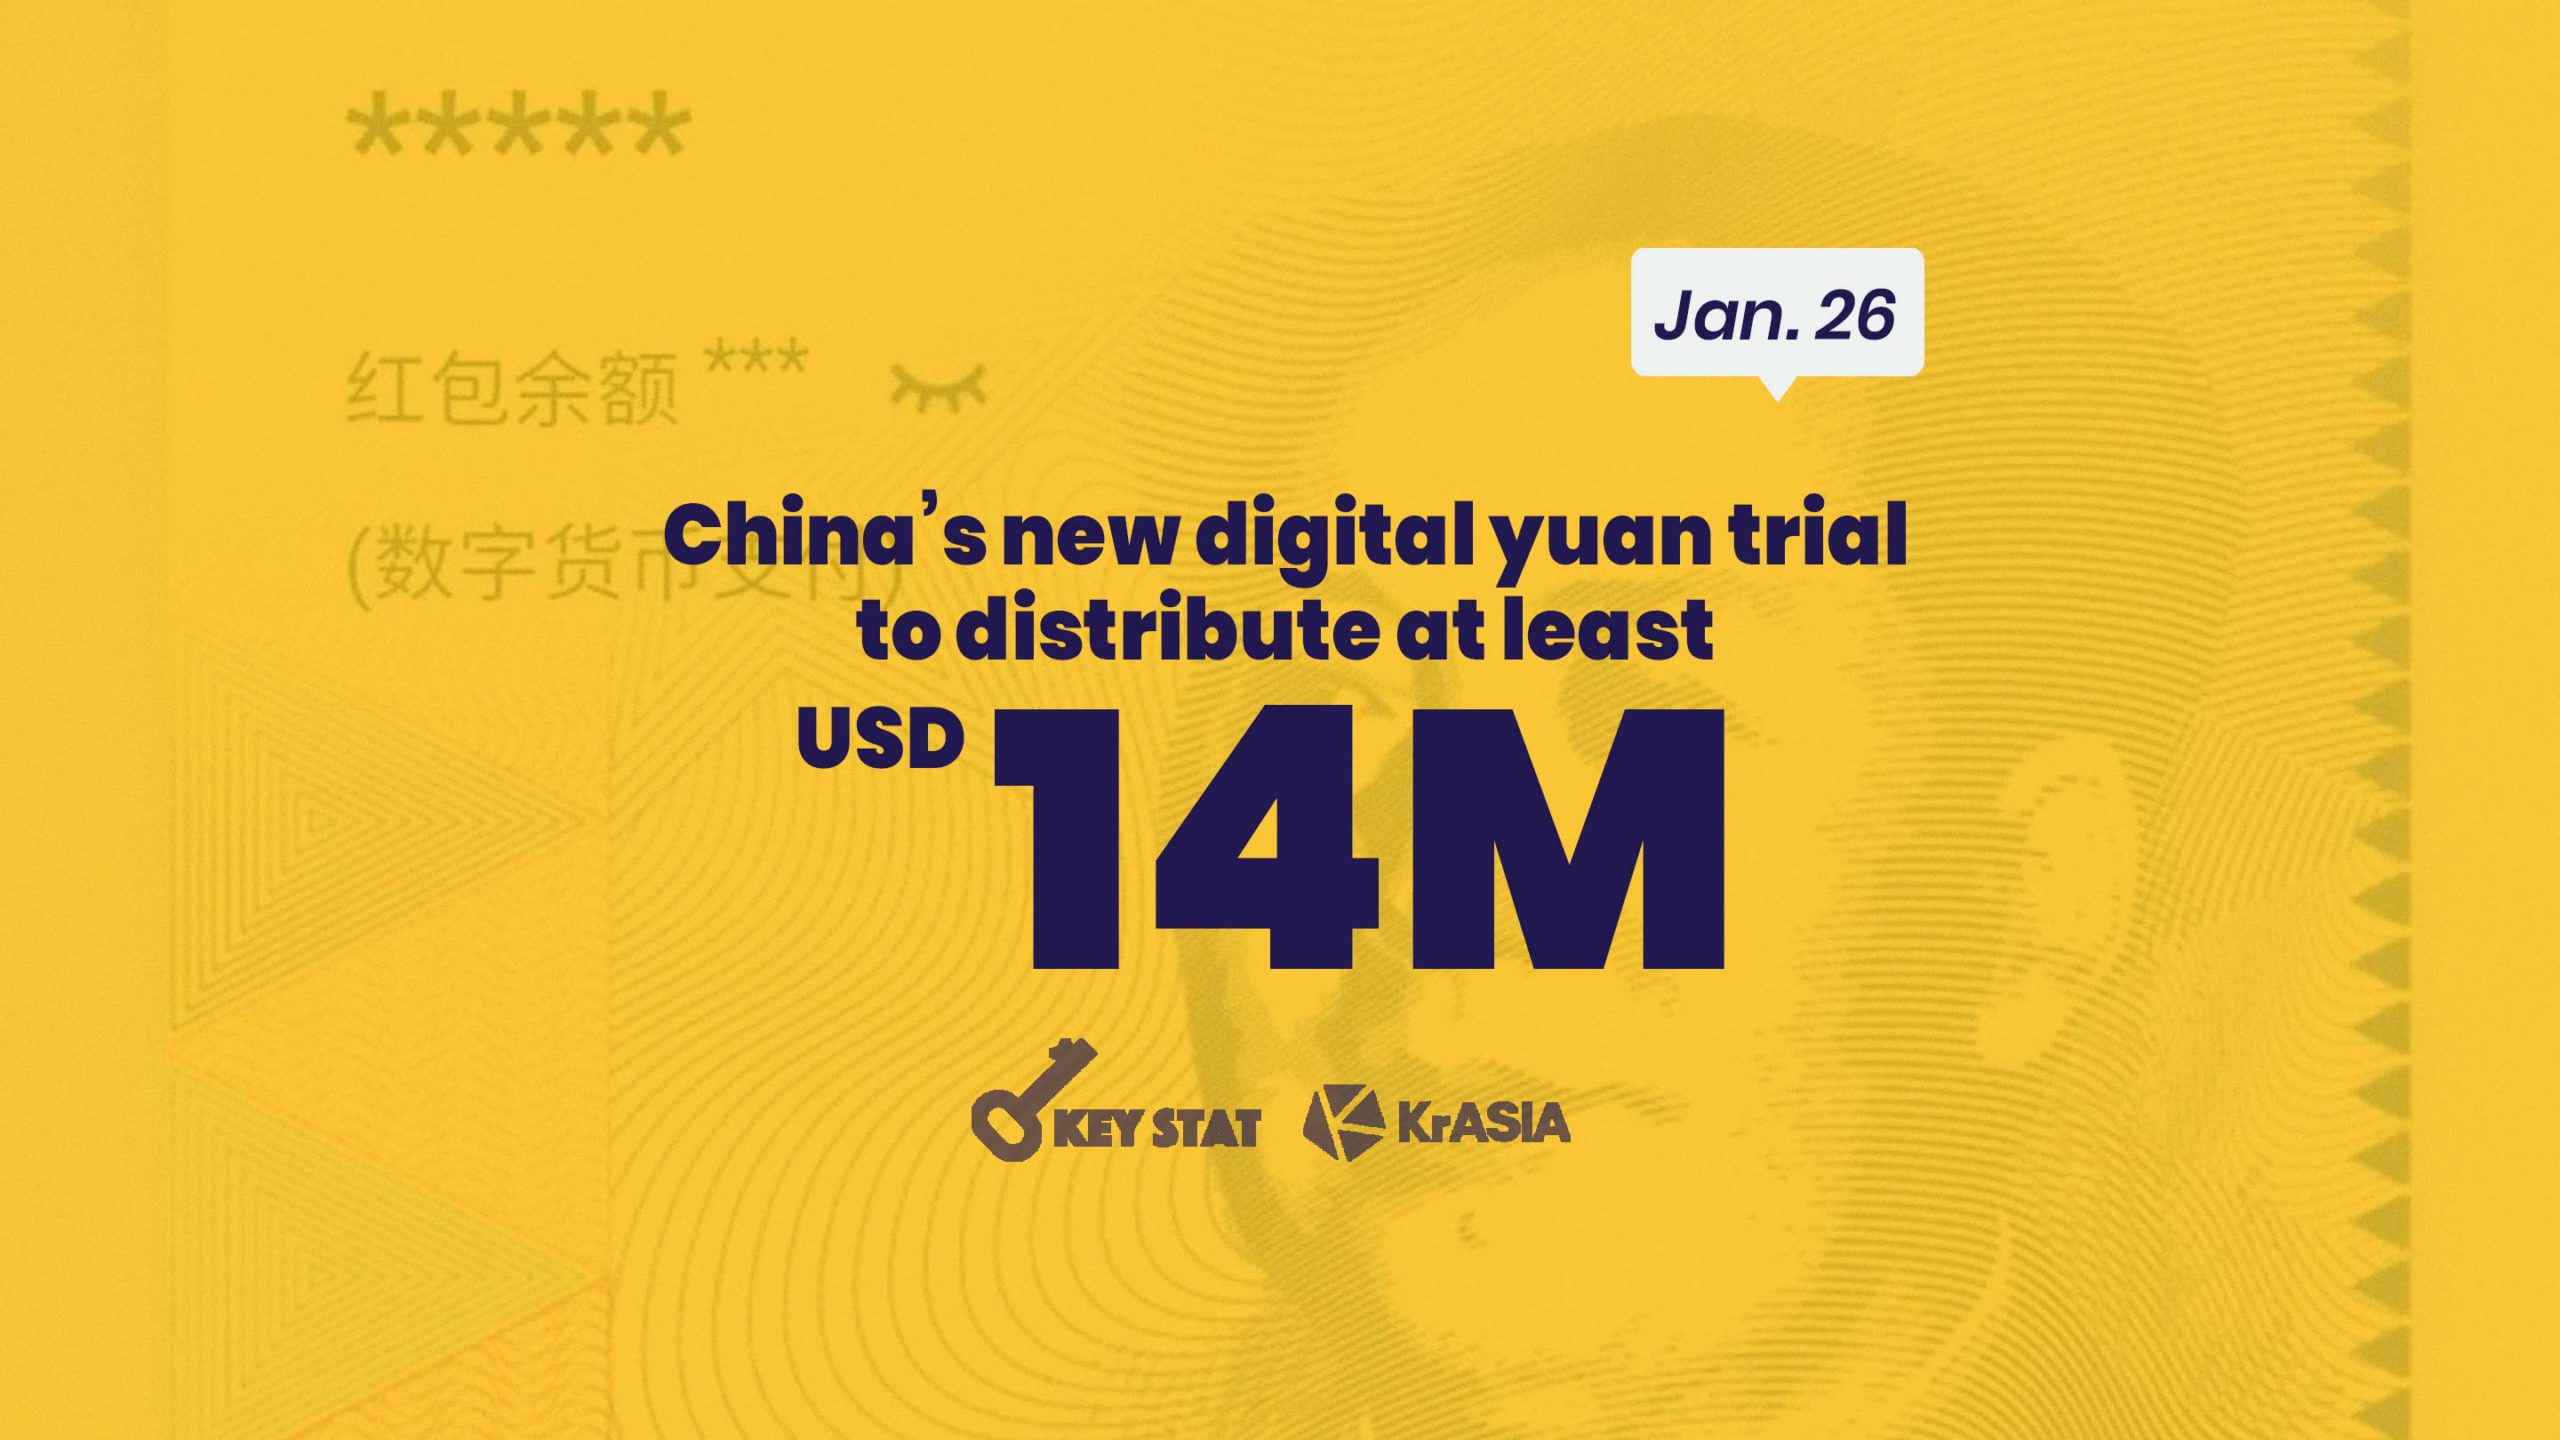 KEY STAT | China accelerates digital currency trials before national holiday